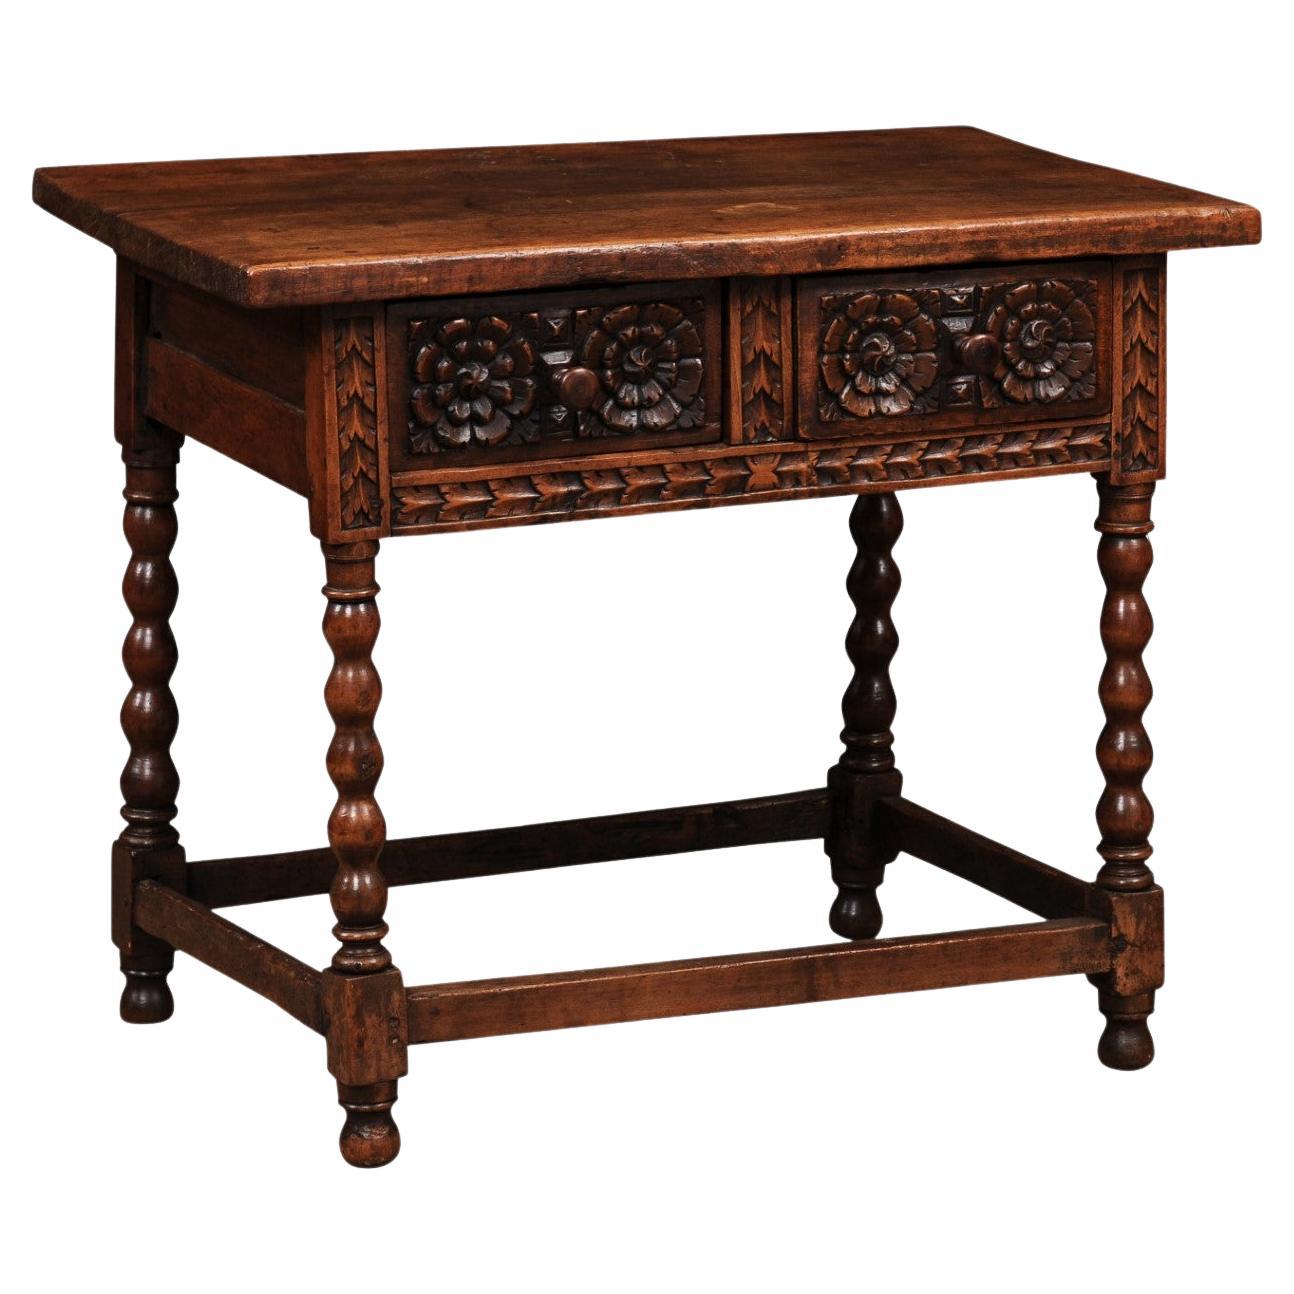 18th Century Spanish Walnut Table with Carved Frieze and 2 Drawers